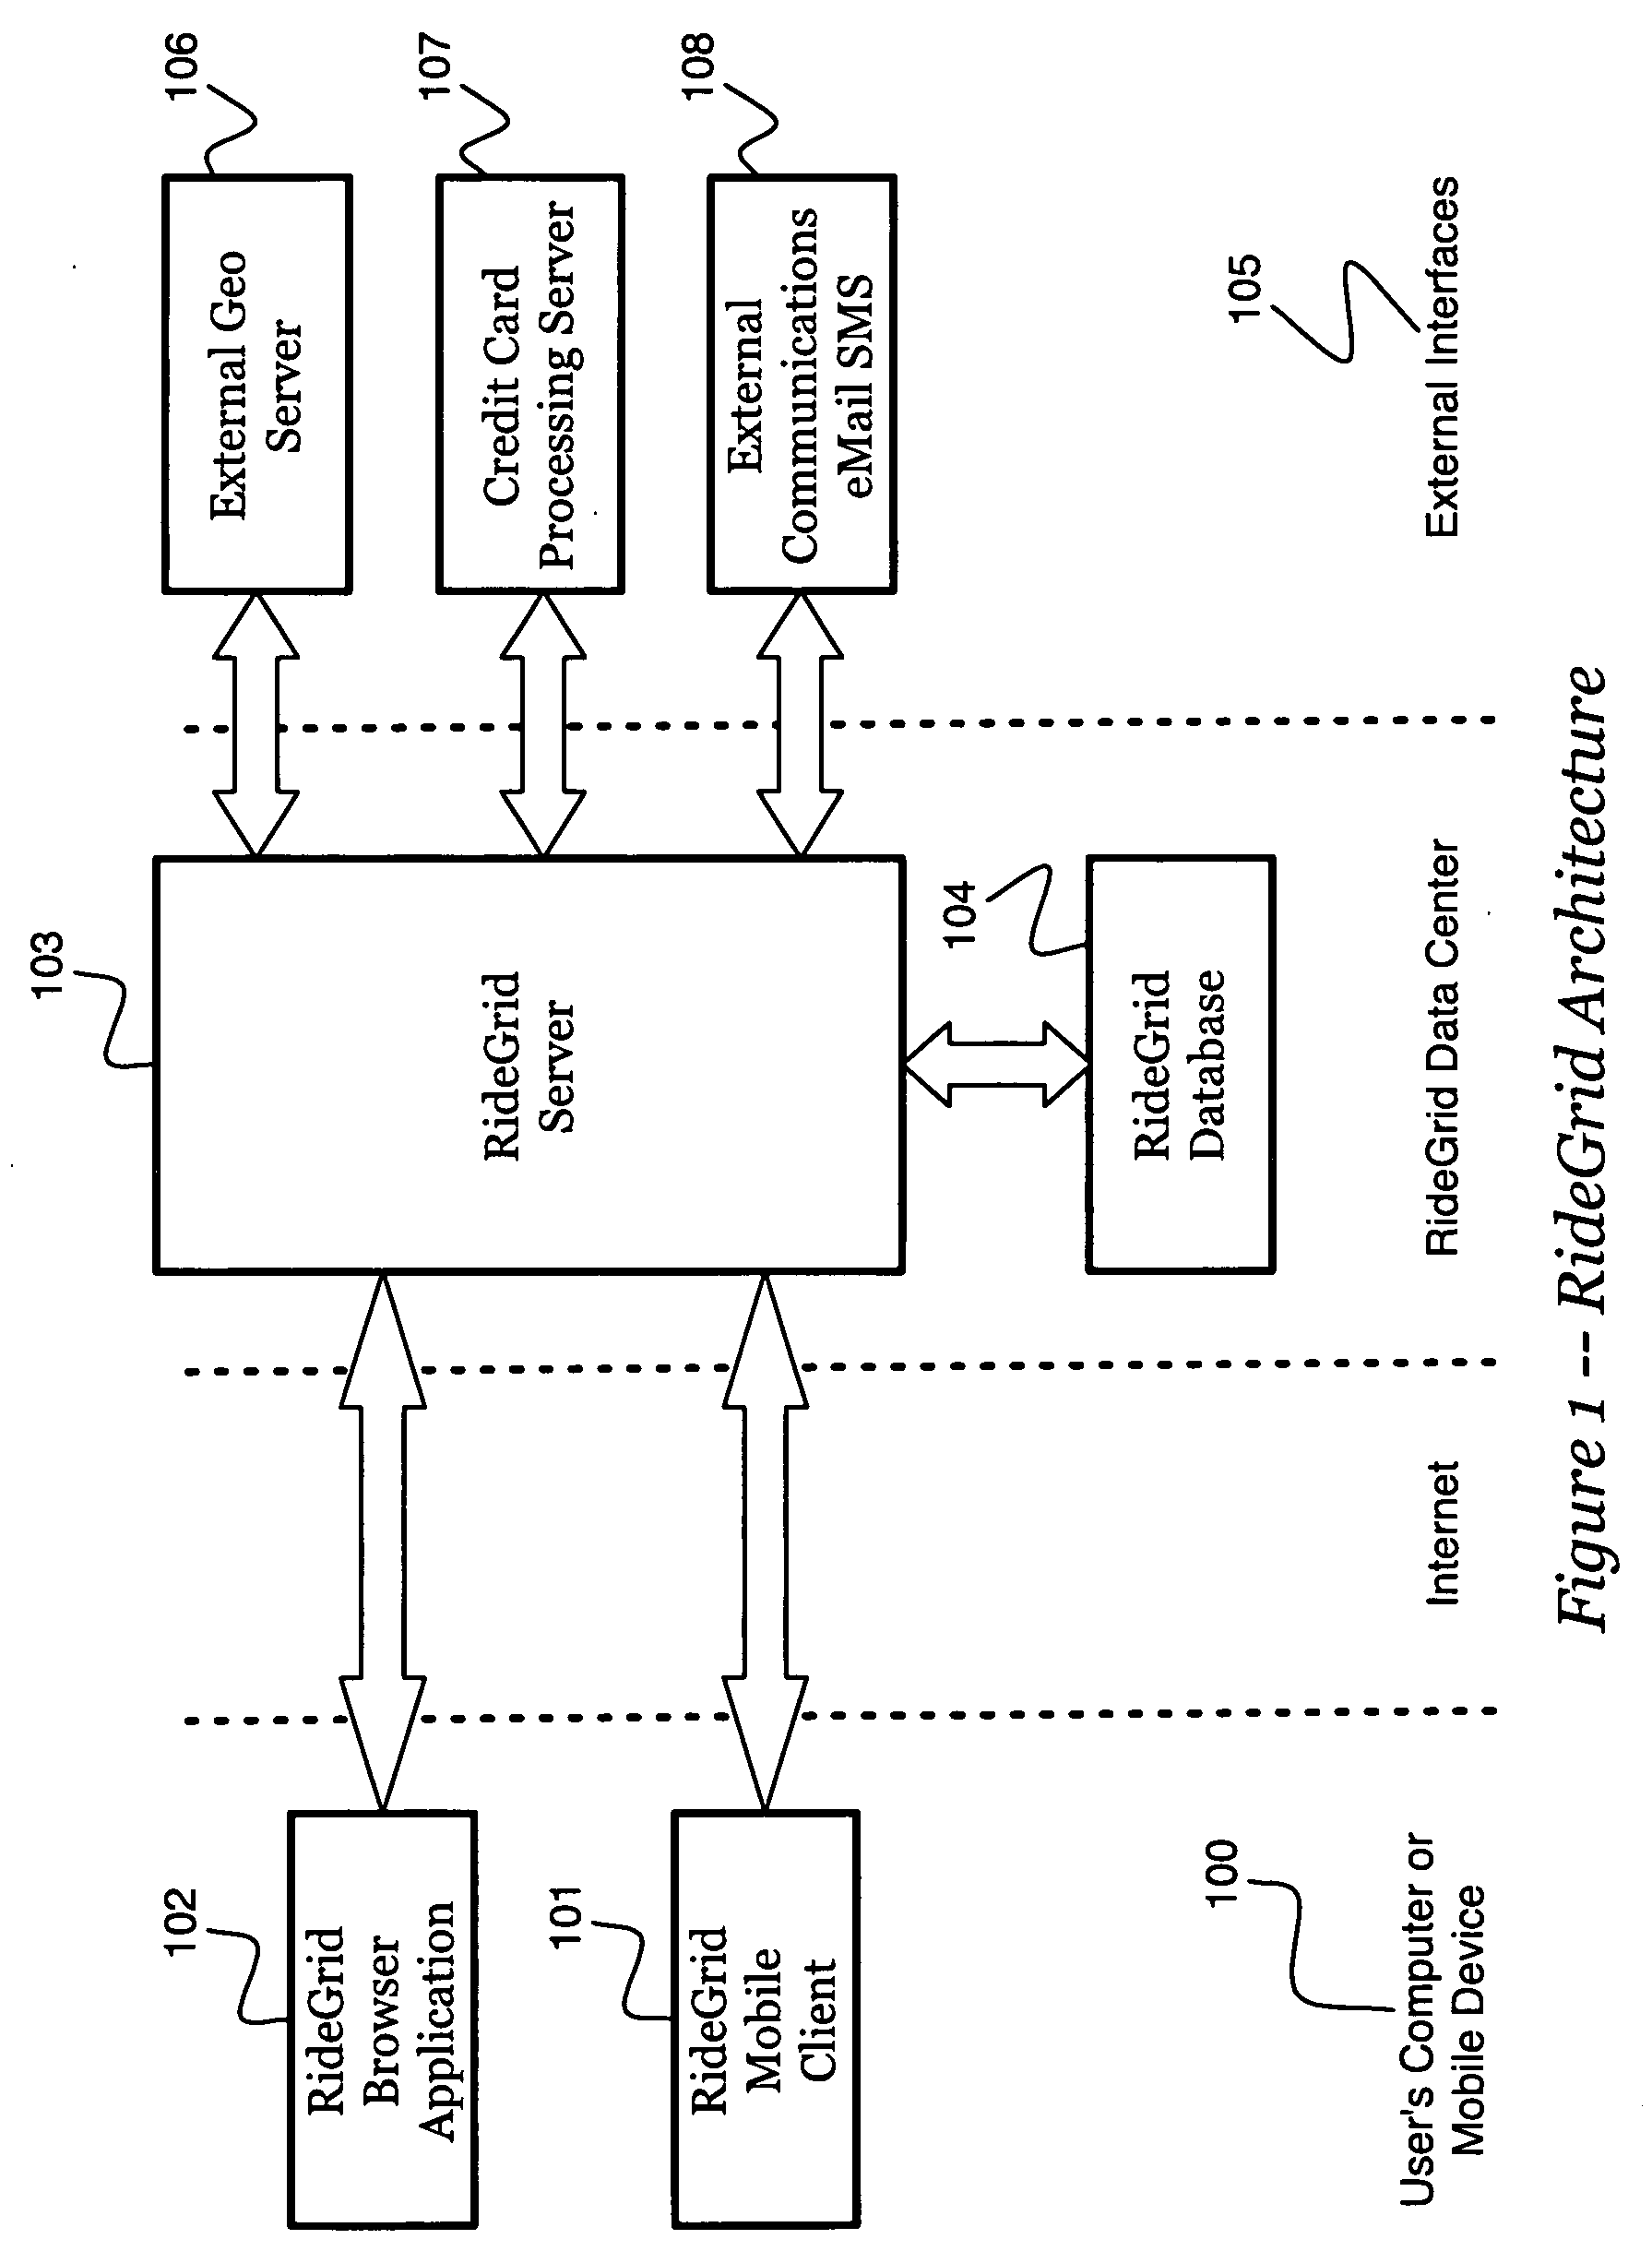 Systems and methods for enhancing private transportation